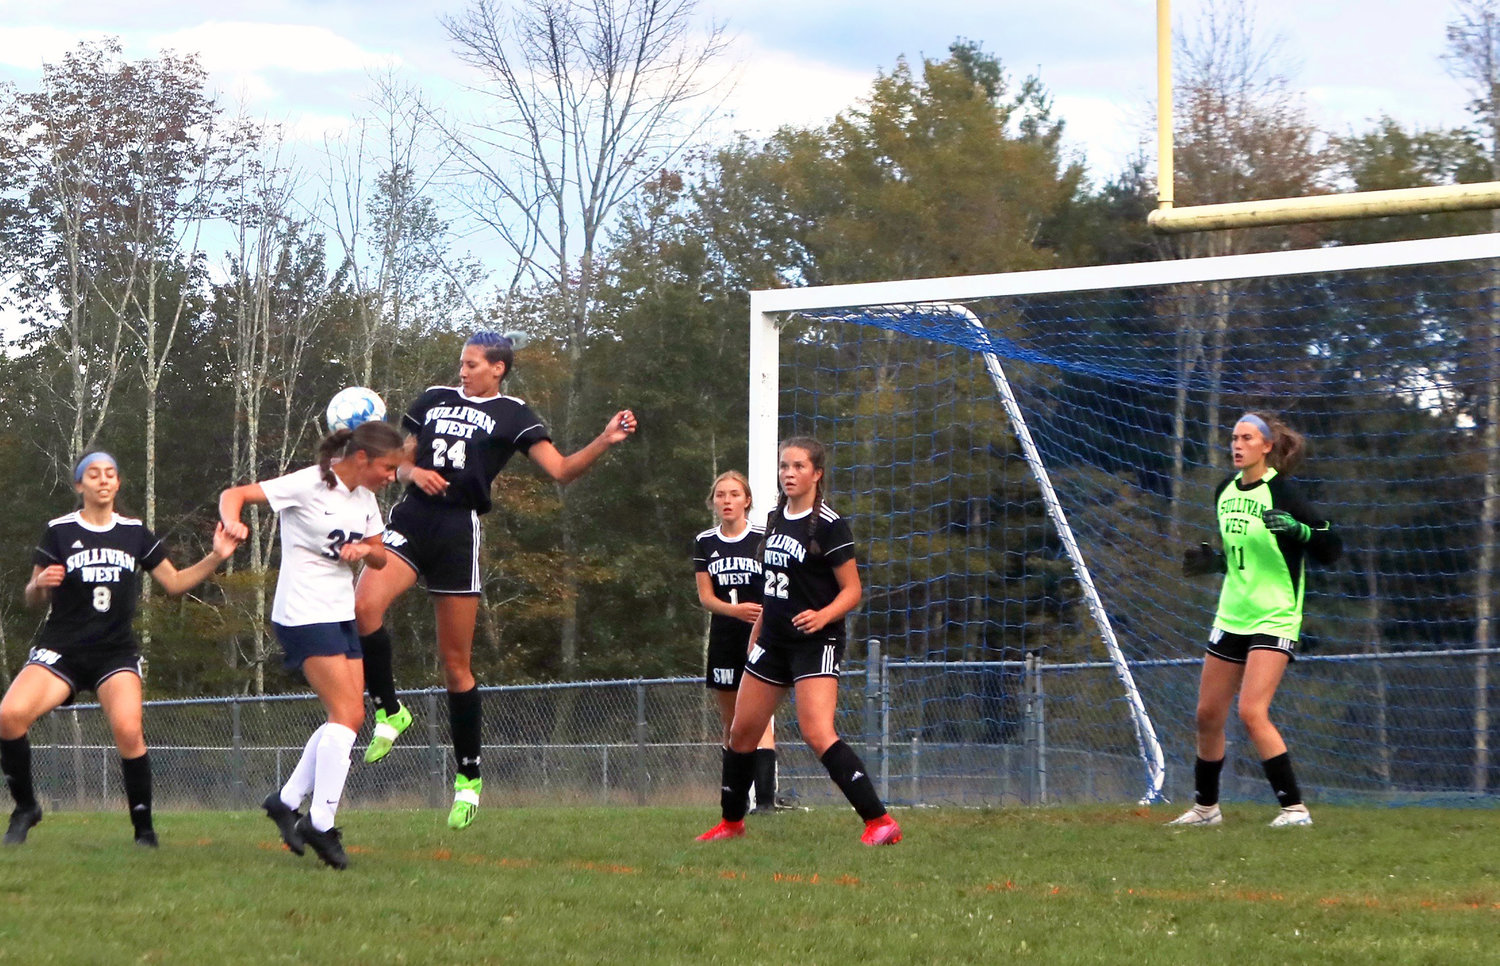 SW senior Anna Bernas proved her value in the game both offensively and defensively. She had the team’s lone goal in the second period. Here she rises to deflect a Burke shot on goal.